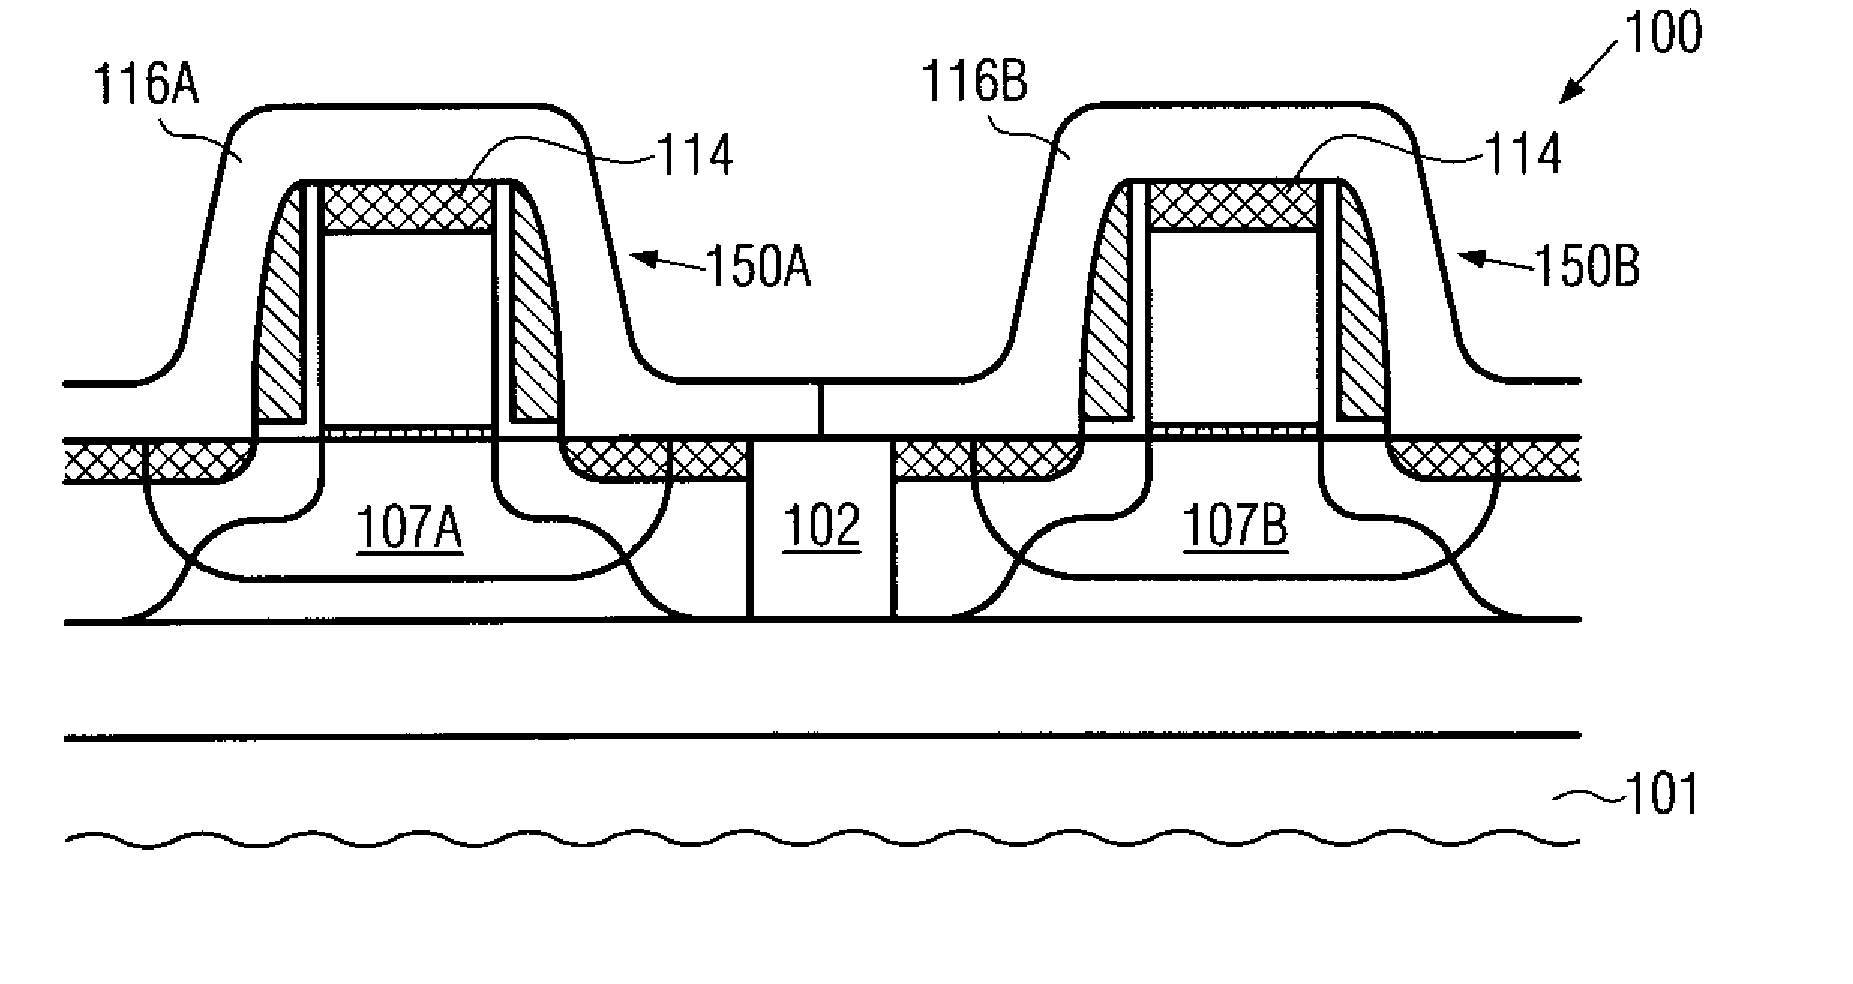 Transistor having a strained channel region including a performance enhancing material composition